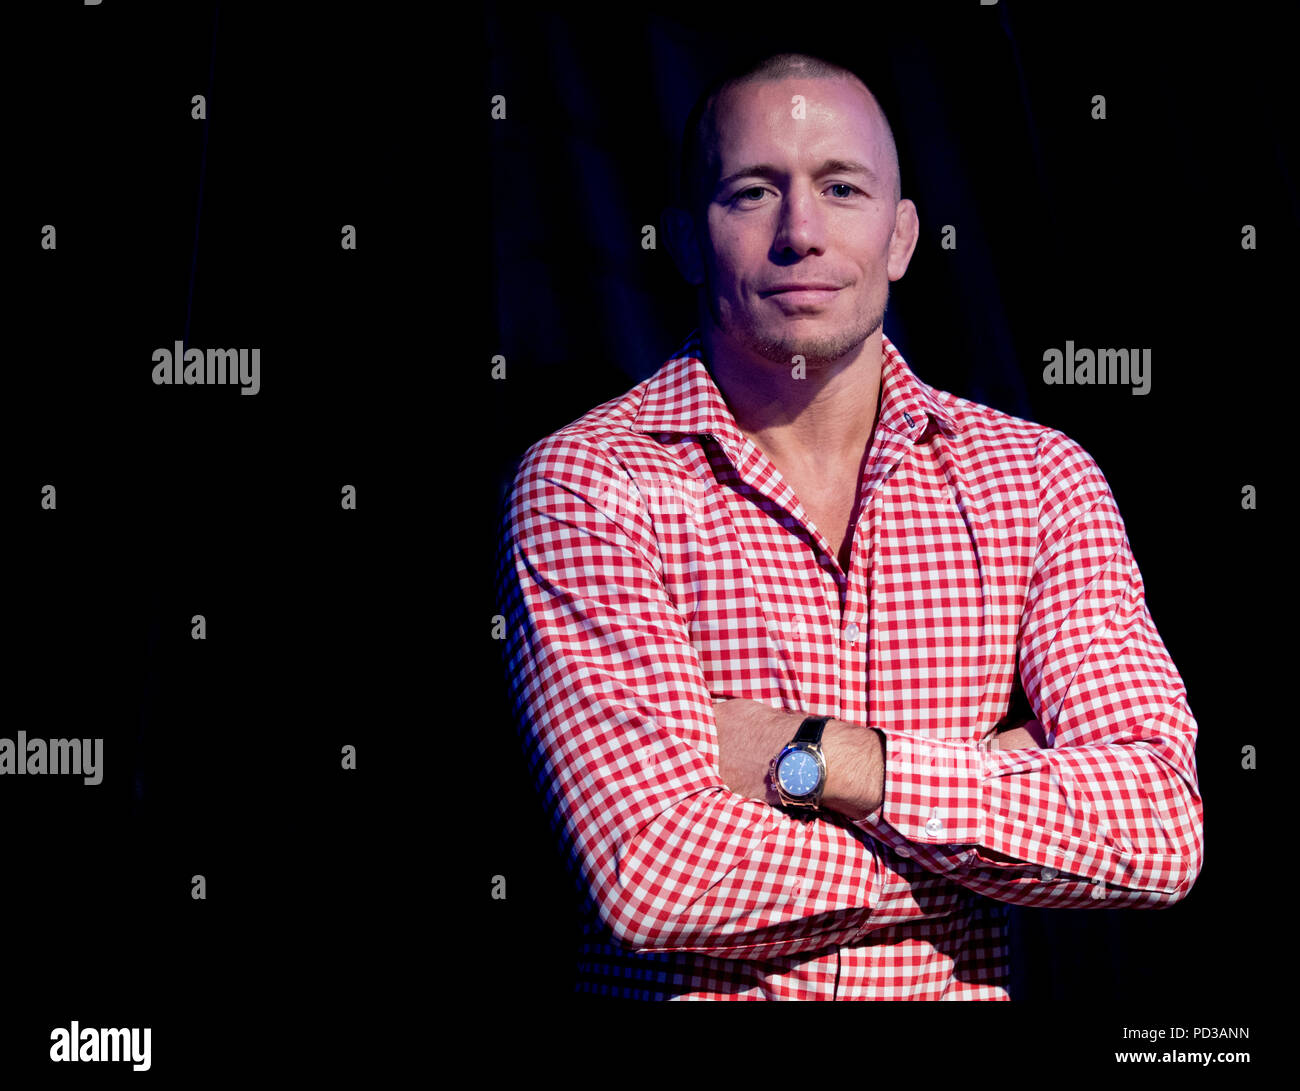 Sydney, Australia. 6th Aug, 2018. Ultimate Fighting Championship(UFC) player George St-Pierre reacts after press conference in Sydney, Australia, on Aug. 6, 2018. St-Pierre will give three speeches in Sydney, Melbourne and Brisbane this week to share the lessons he learned in mixed matrial arts. Credit: Zhu Hongye/Xinhua/Alamy Live News Stock Photo